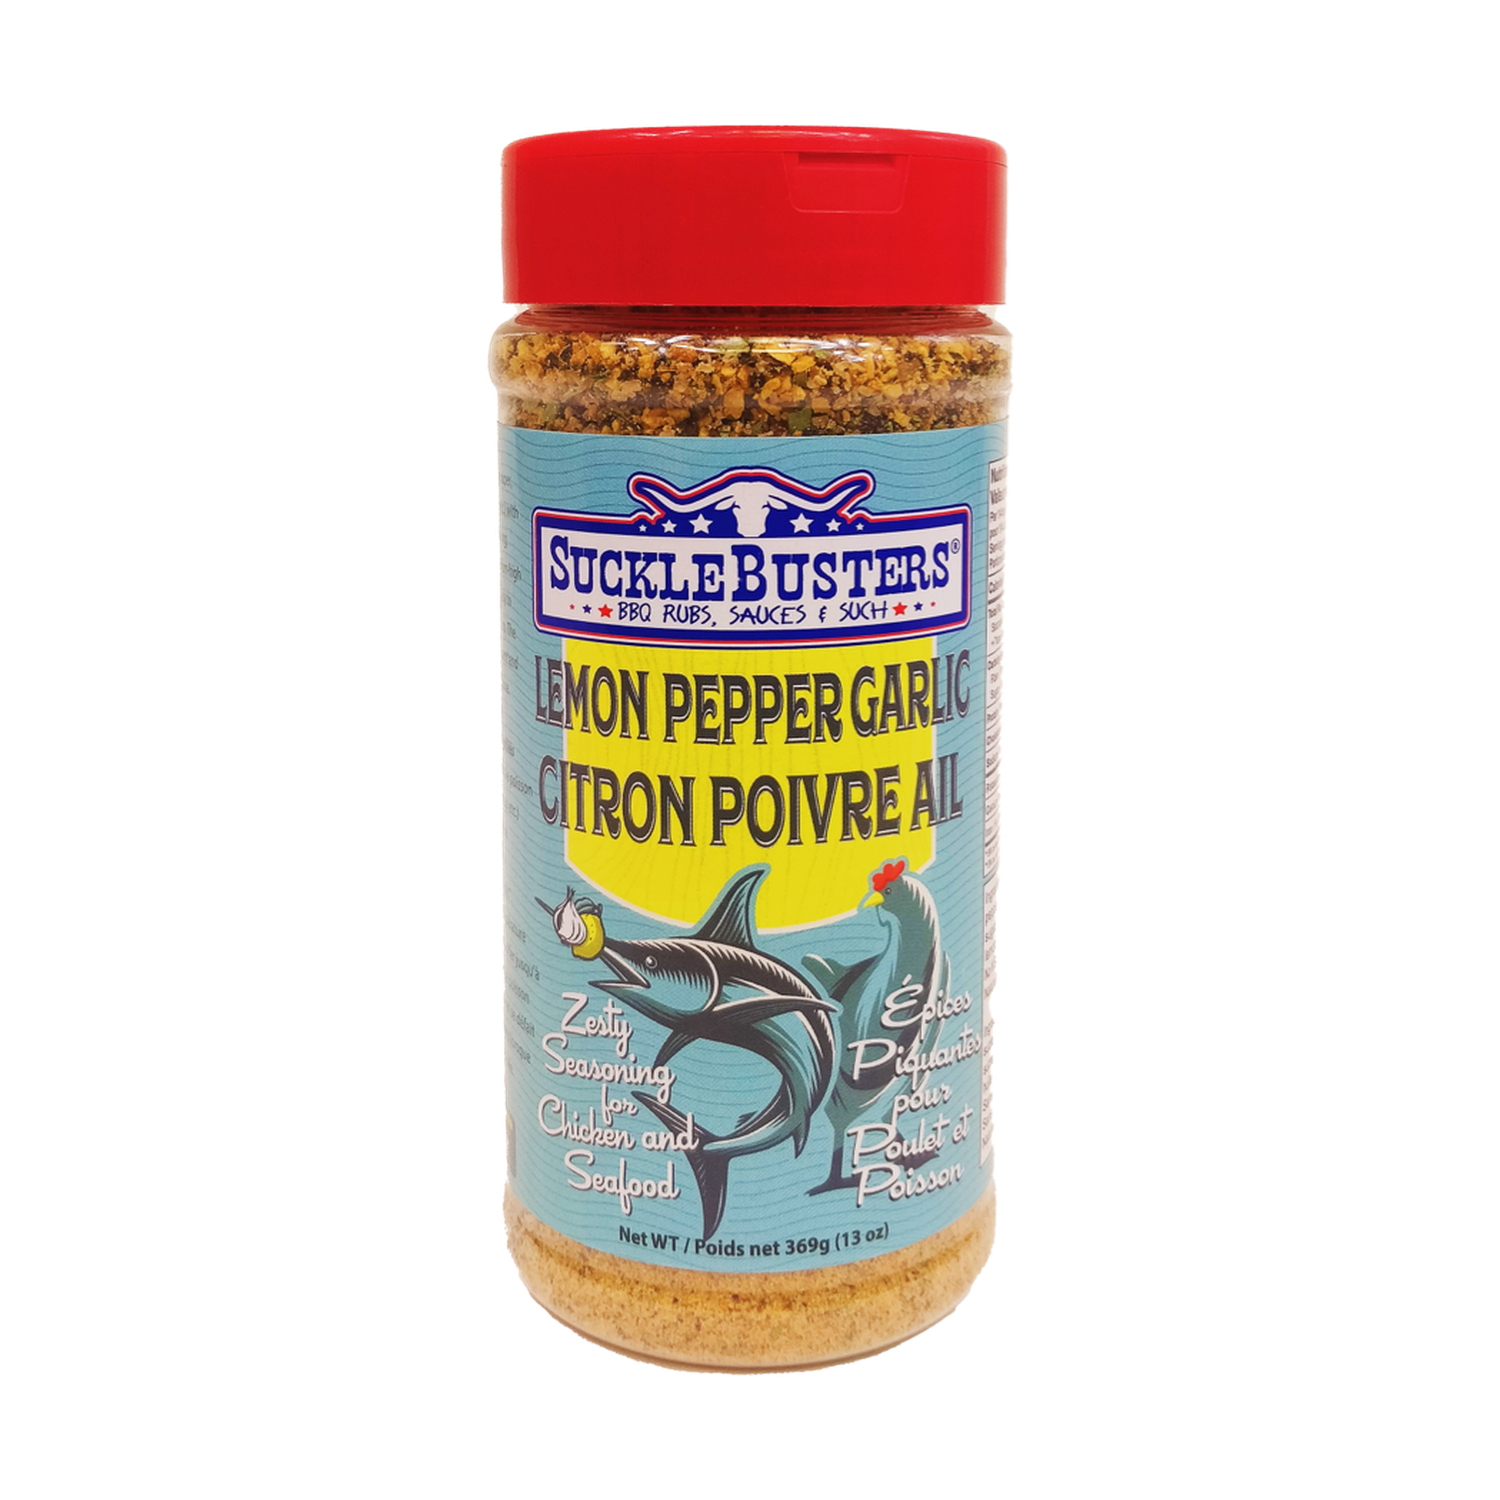 Sucklebusters Lemon Pepper Garlic Seafood Rub Suckle Busters Chilliwack BBQ Supply